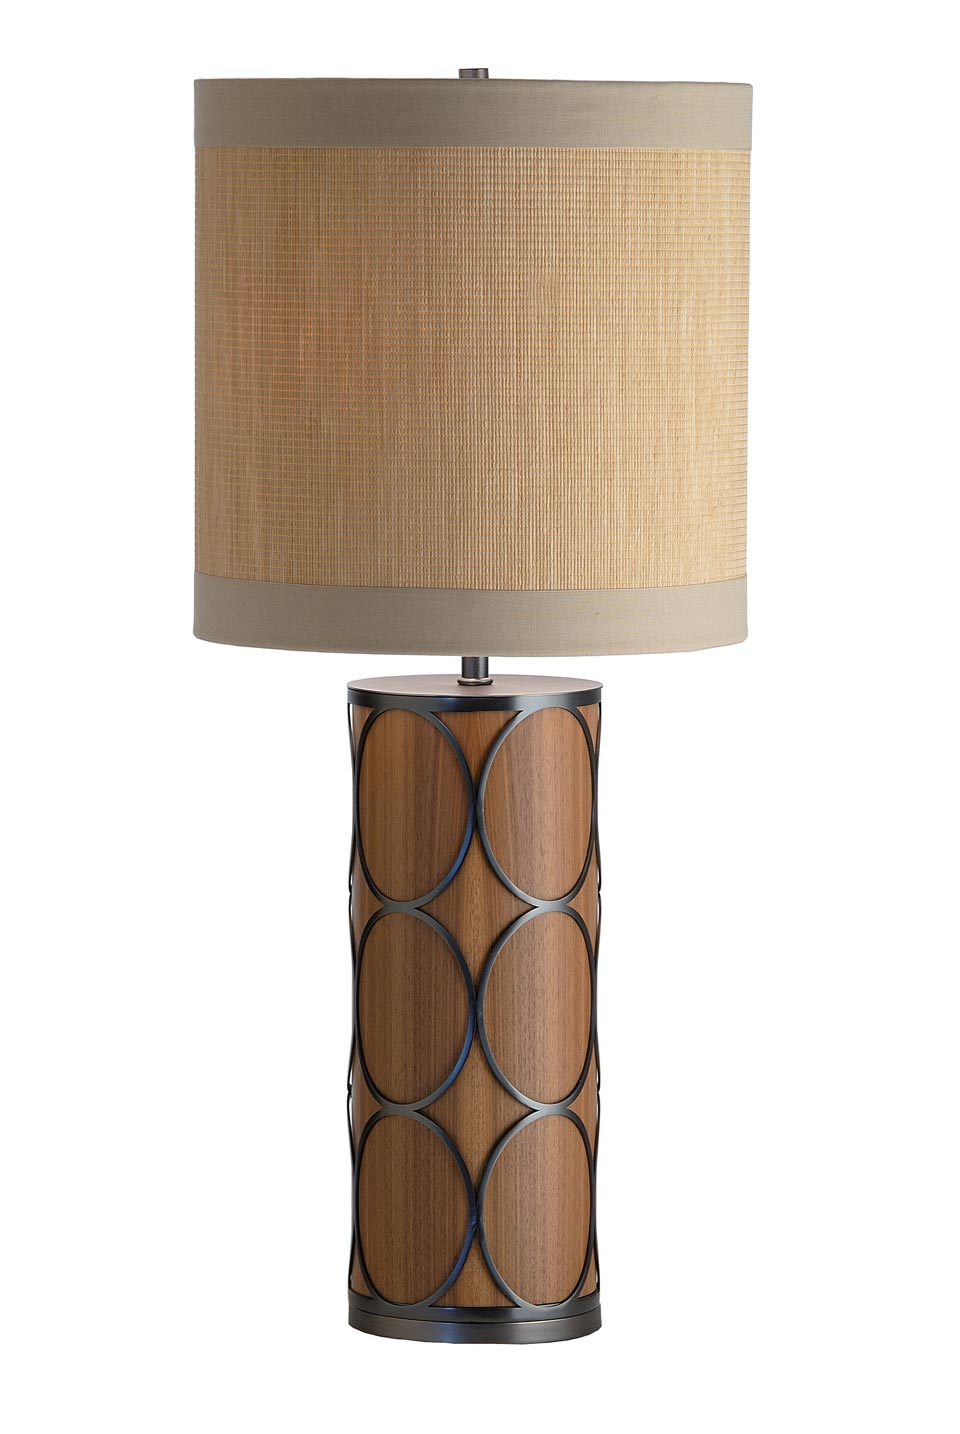 Helena Contemporary Wooden Table Lamp, Carved Wood Table Lamps